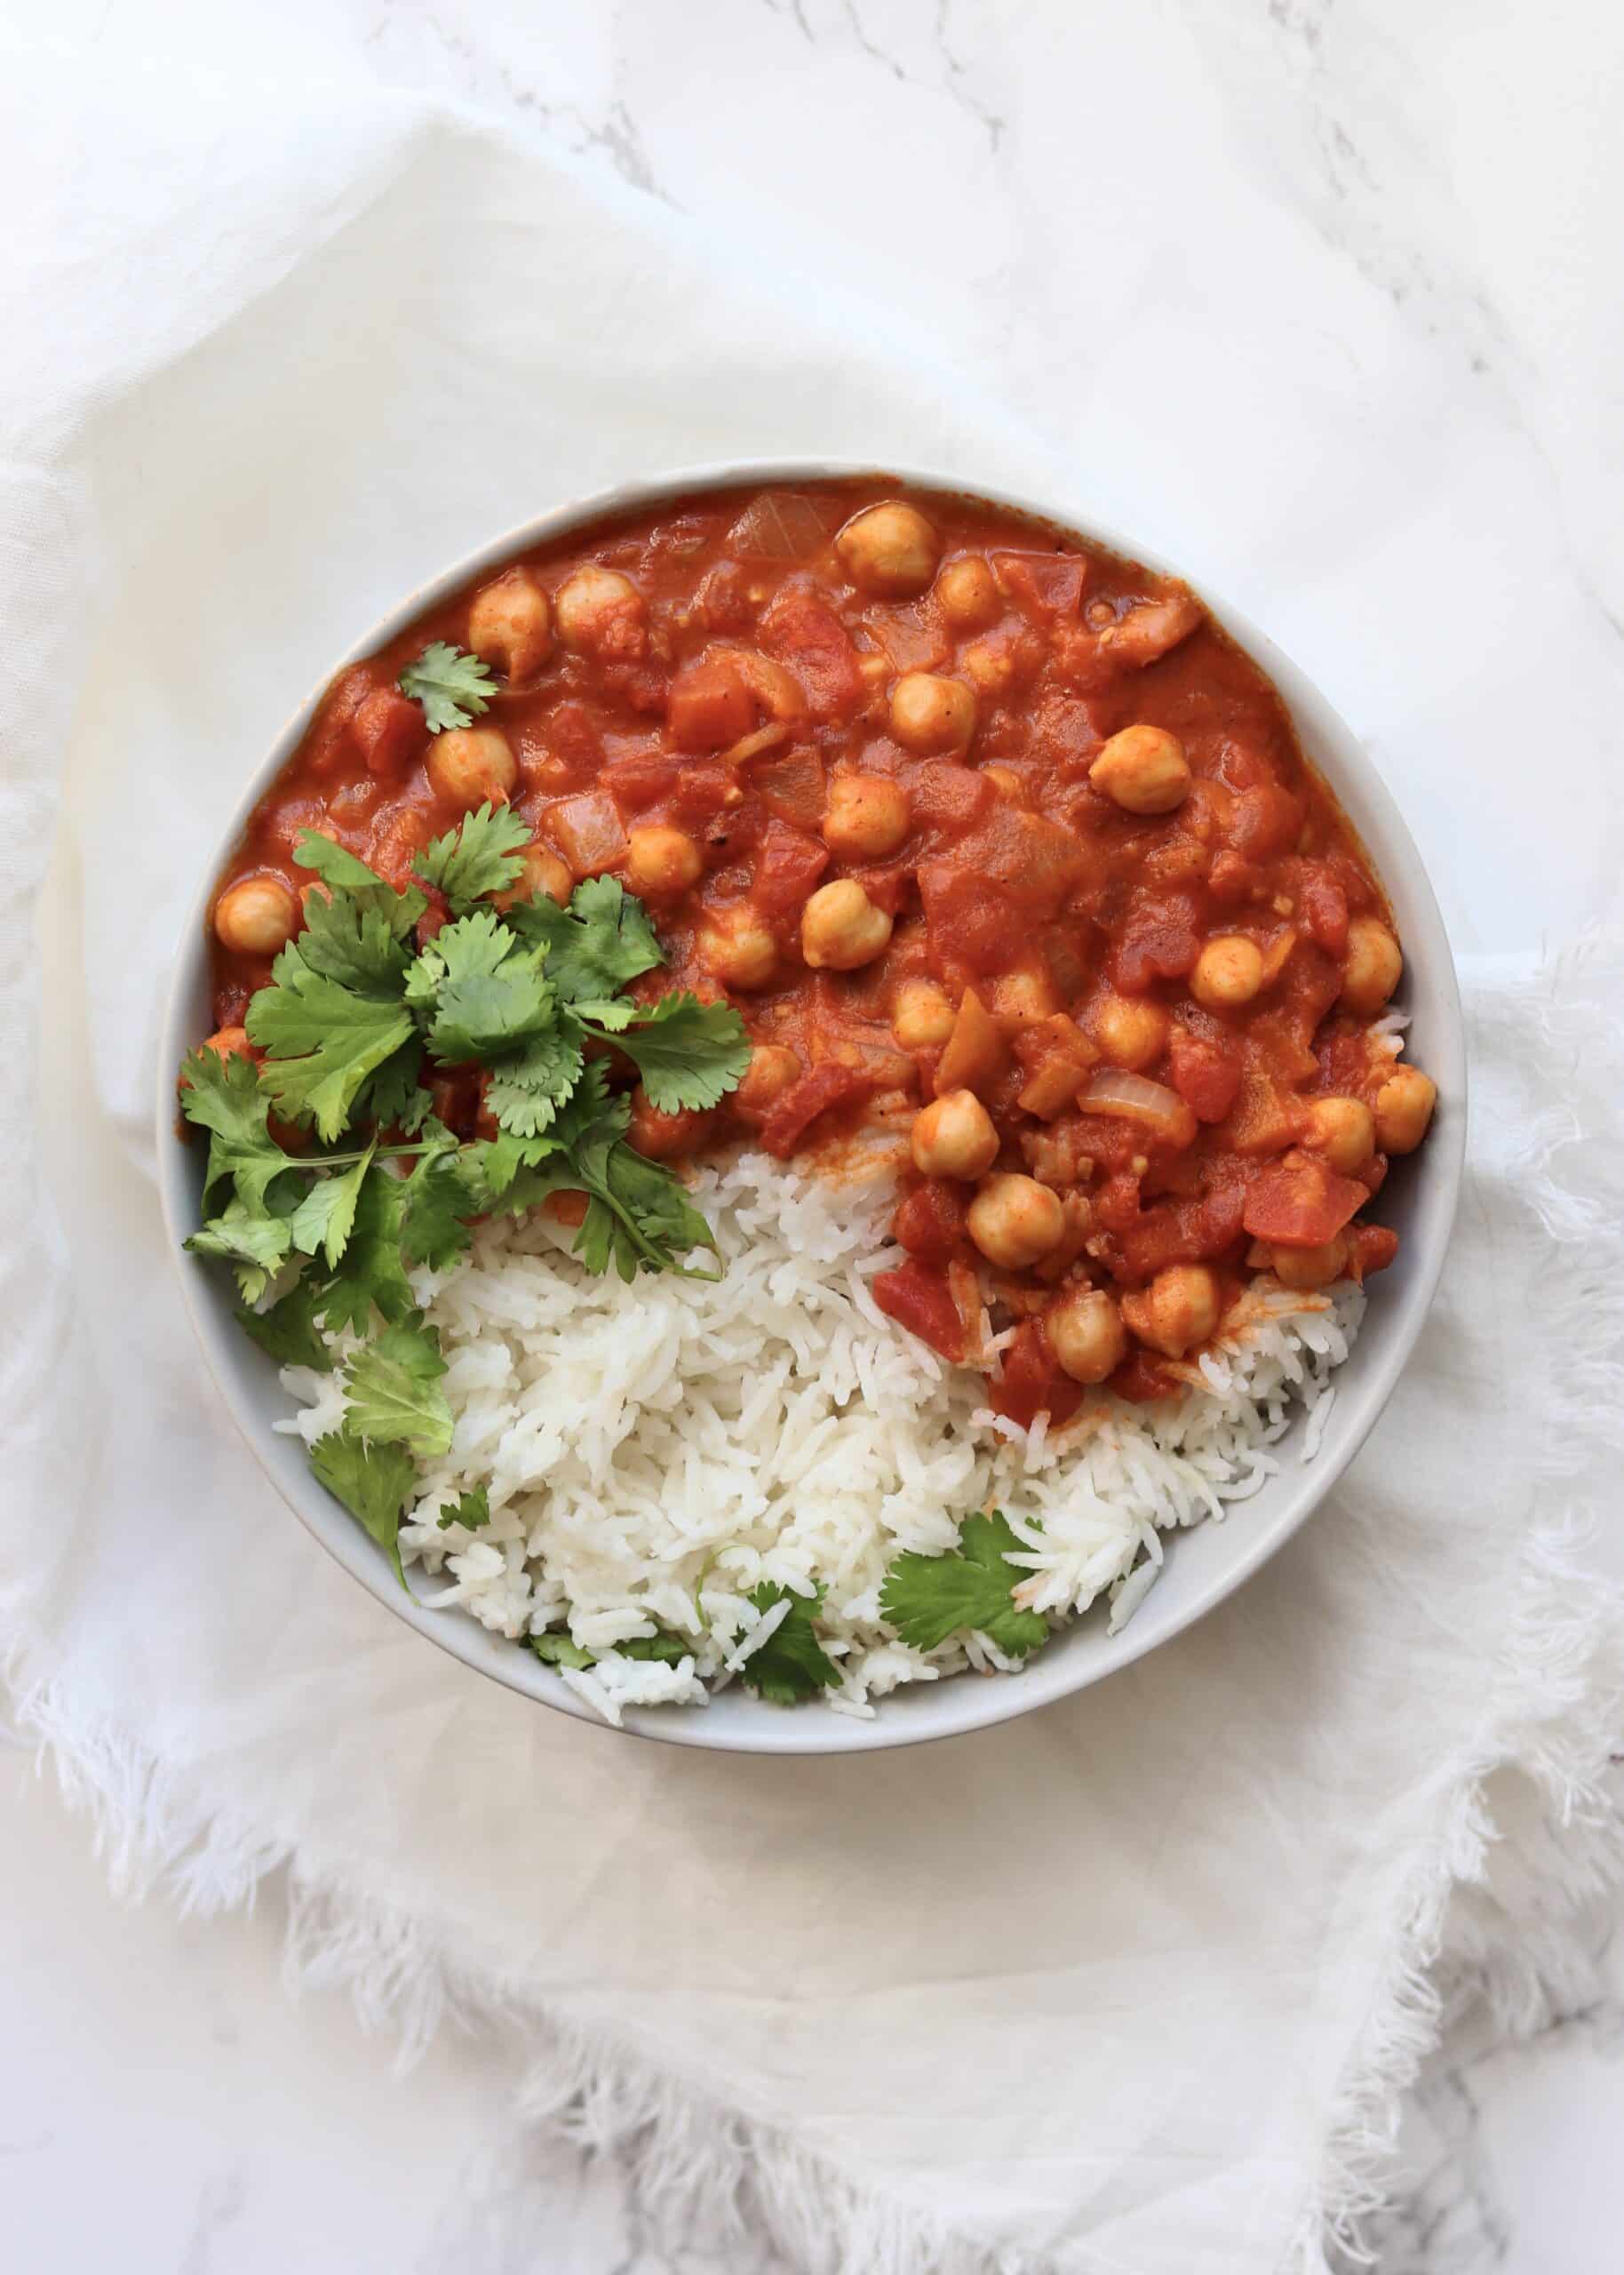 Vegan Chickpea Tikka Masala is perfect for meatless Monday or for healthy vegan meal prep for the week. Using pantry staple ingredients like canned coconut milk to make it creamy but dairy-free.